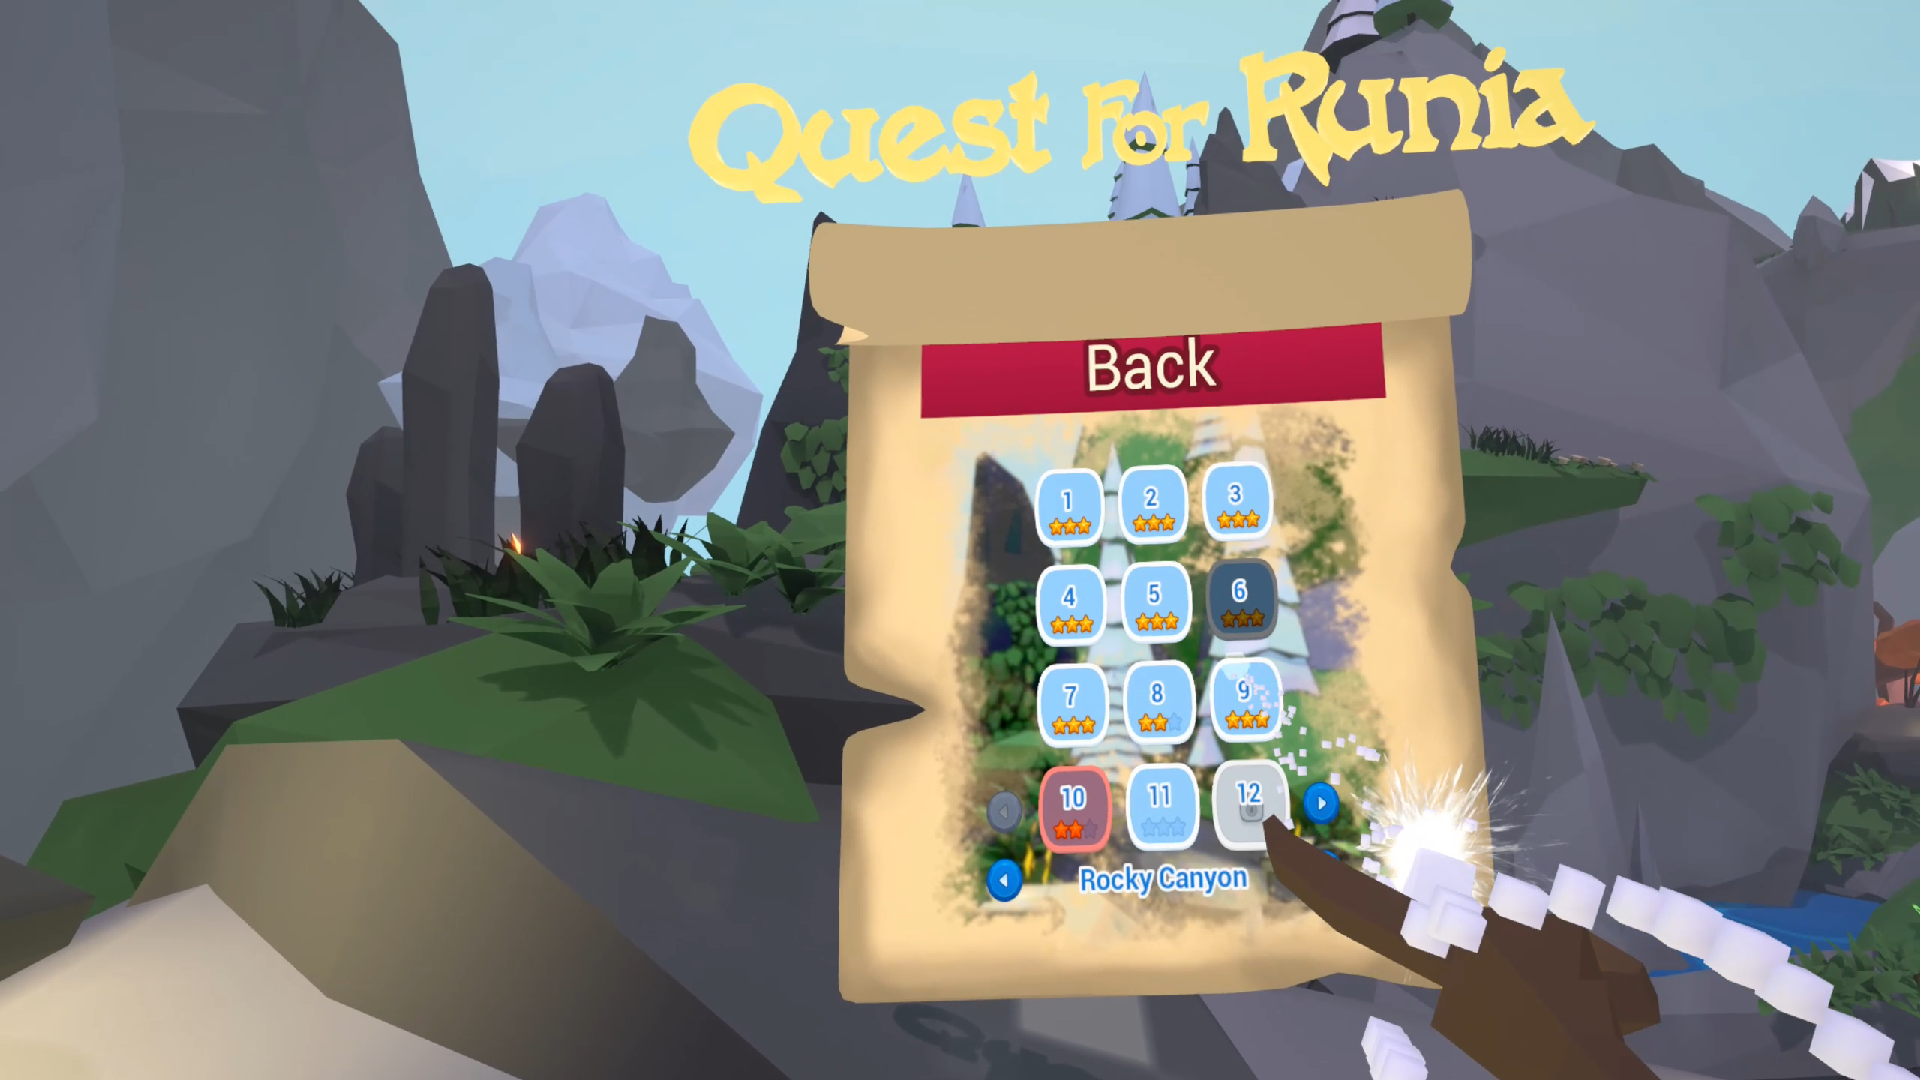 10_Quest for Runia - Rocky Canyon Level Selection Screenshot_by Cykyria.png